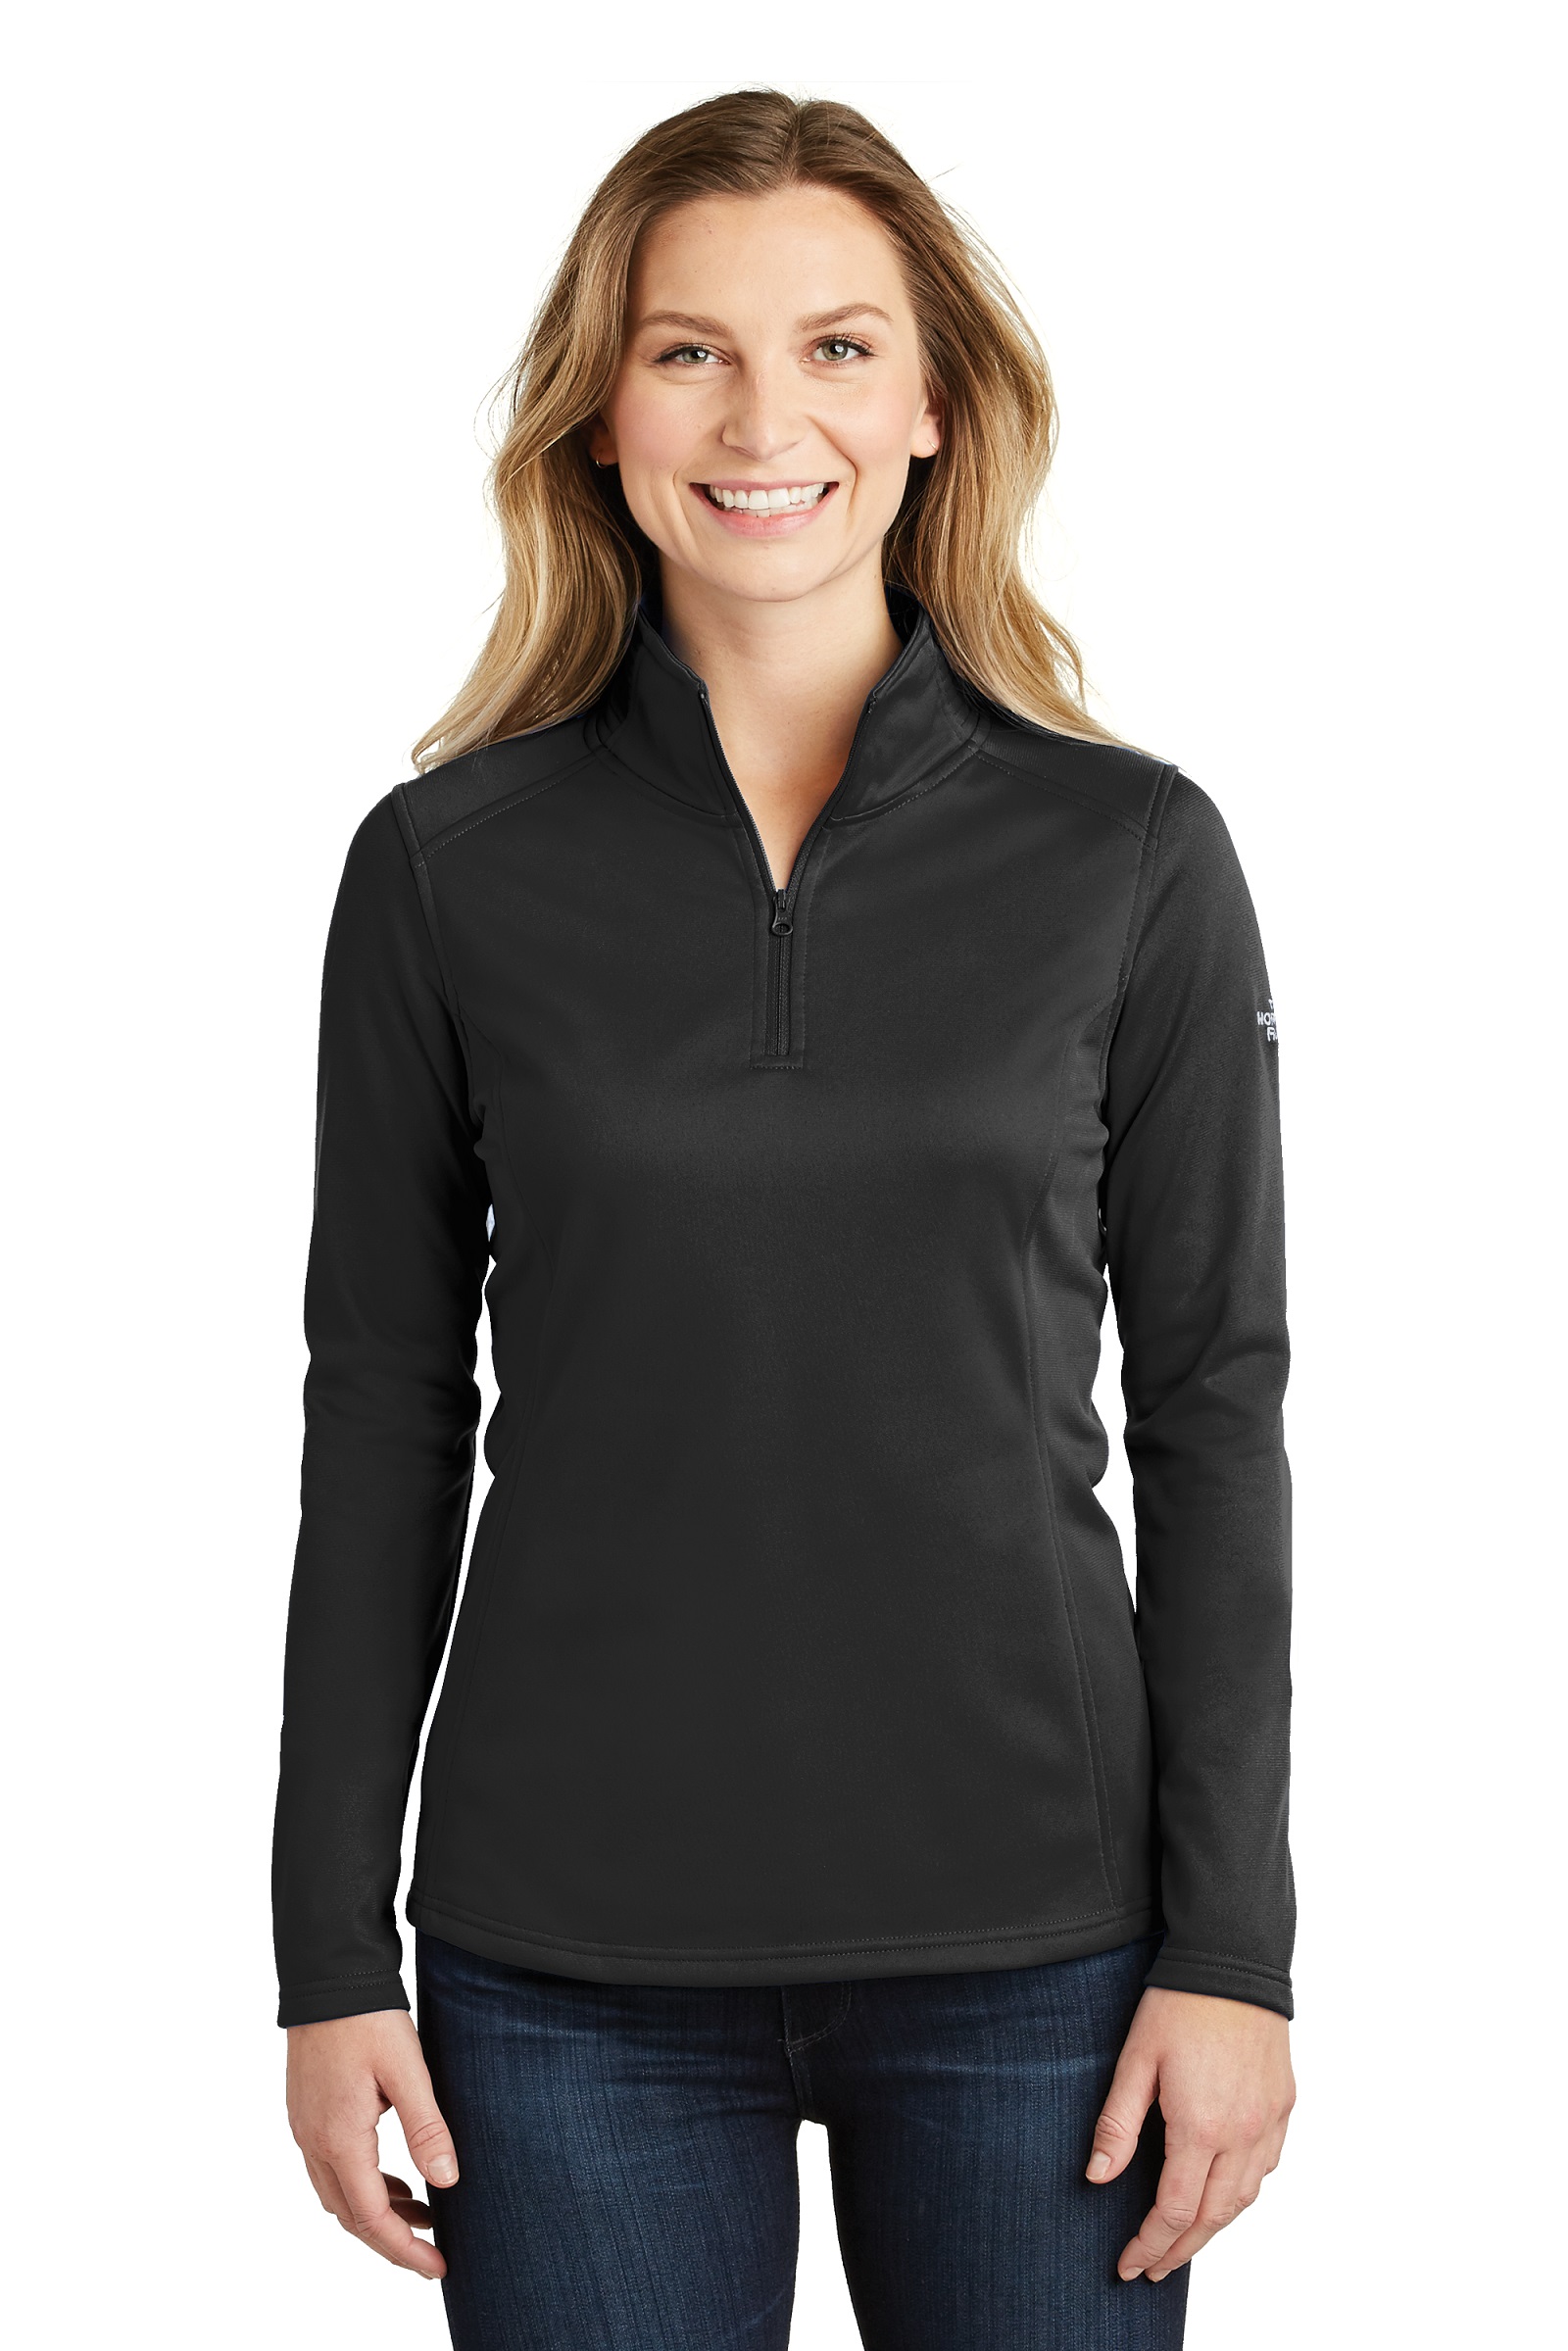 The North Face  Embroidered Women's Tech 1/4-Zip Fleece